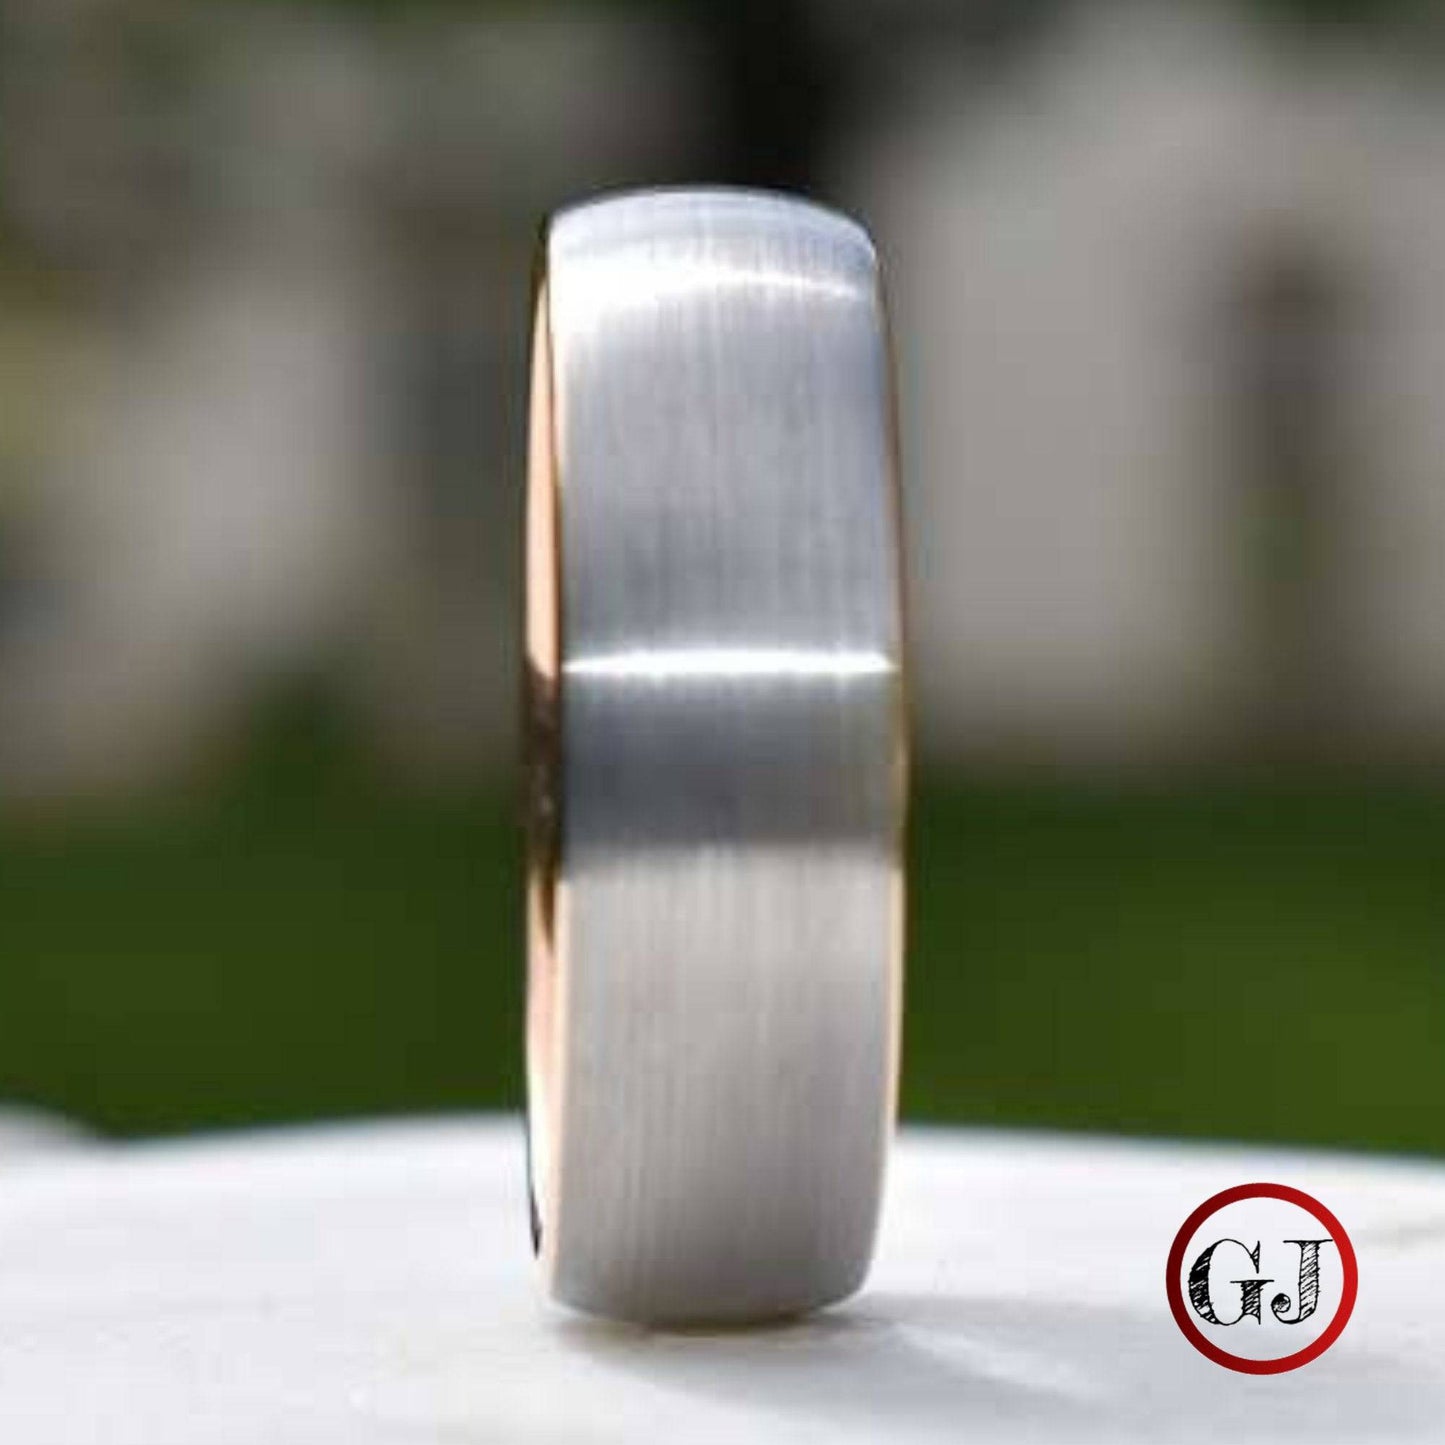 Tungsten Ring 8mm Brushed Silver with Rose Gold Comfort fit band - Tungsten Titans